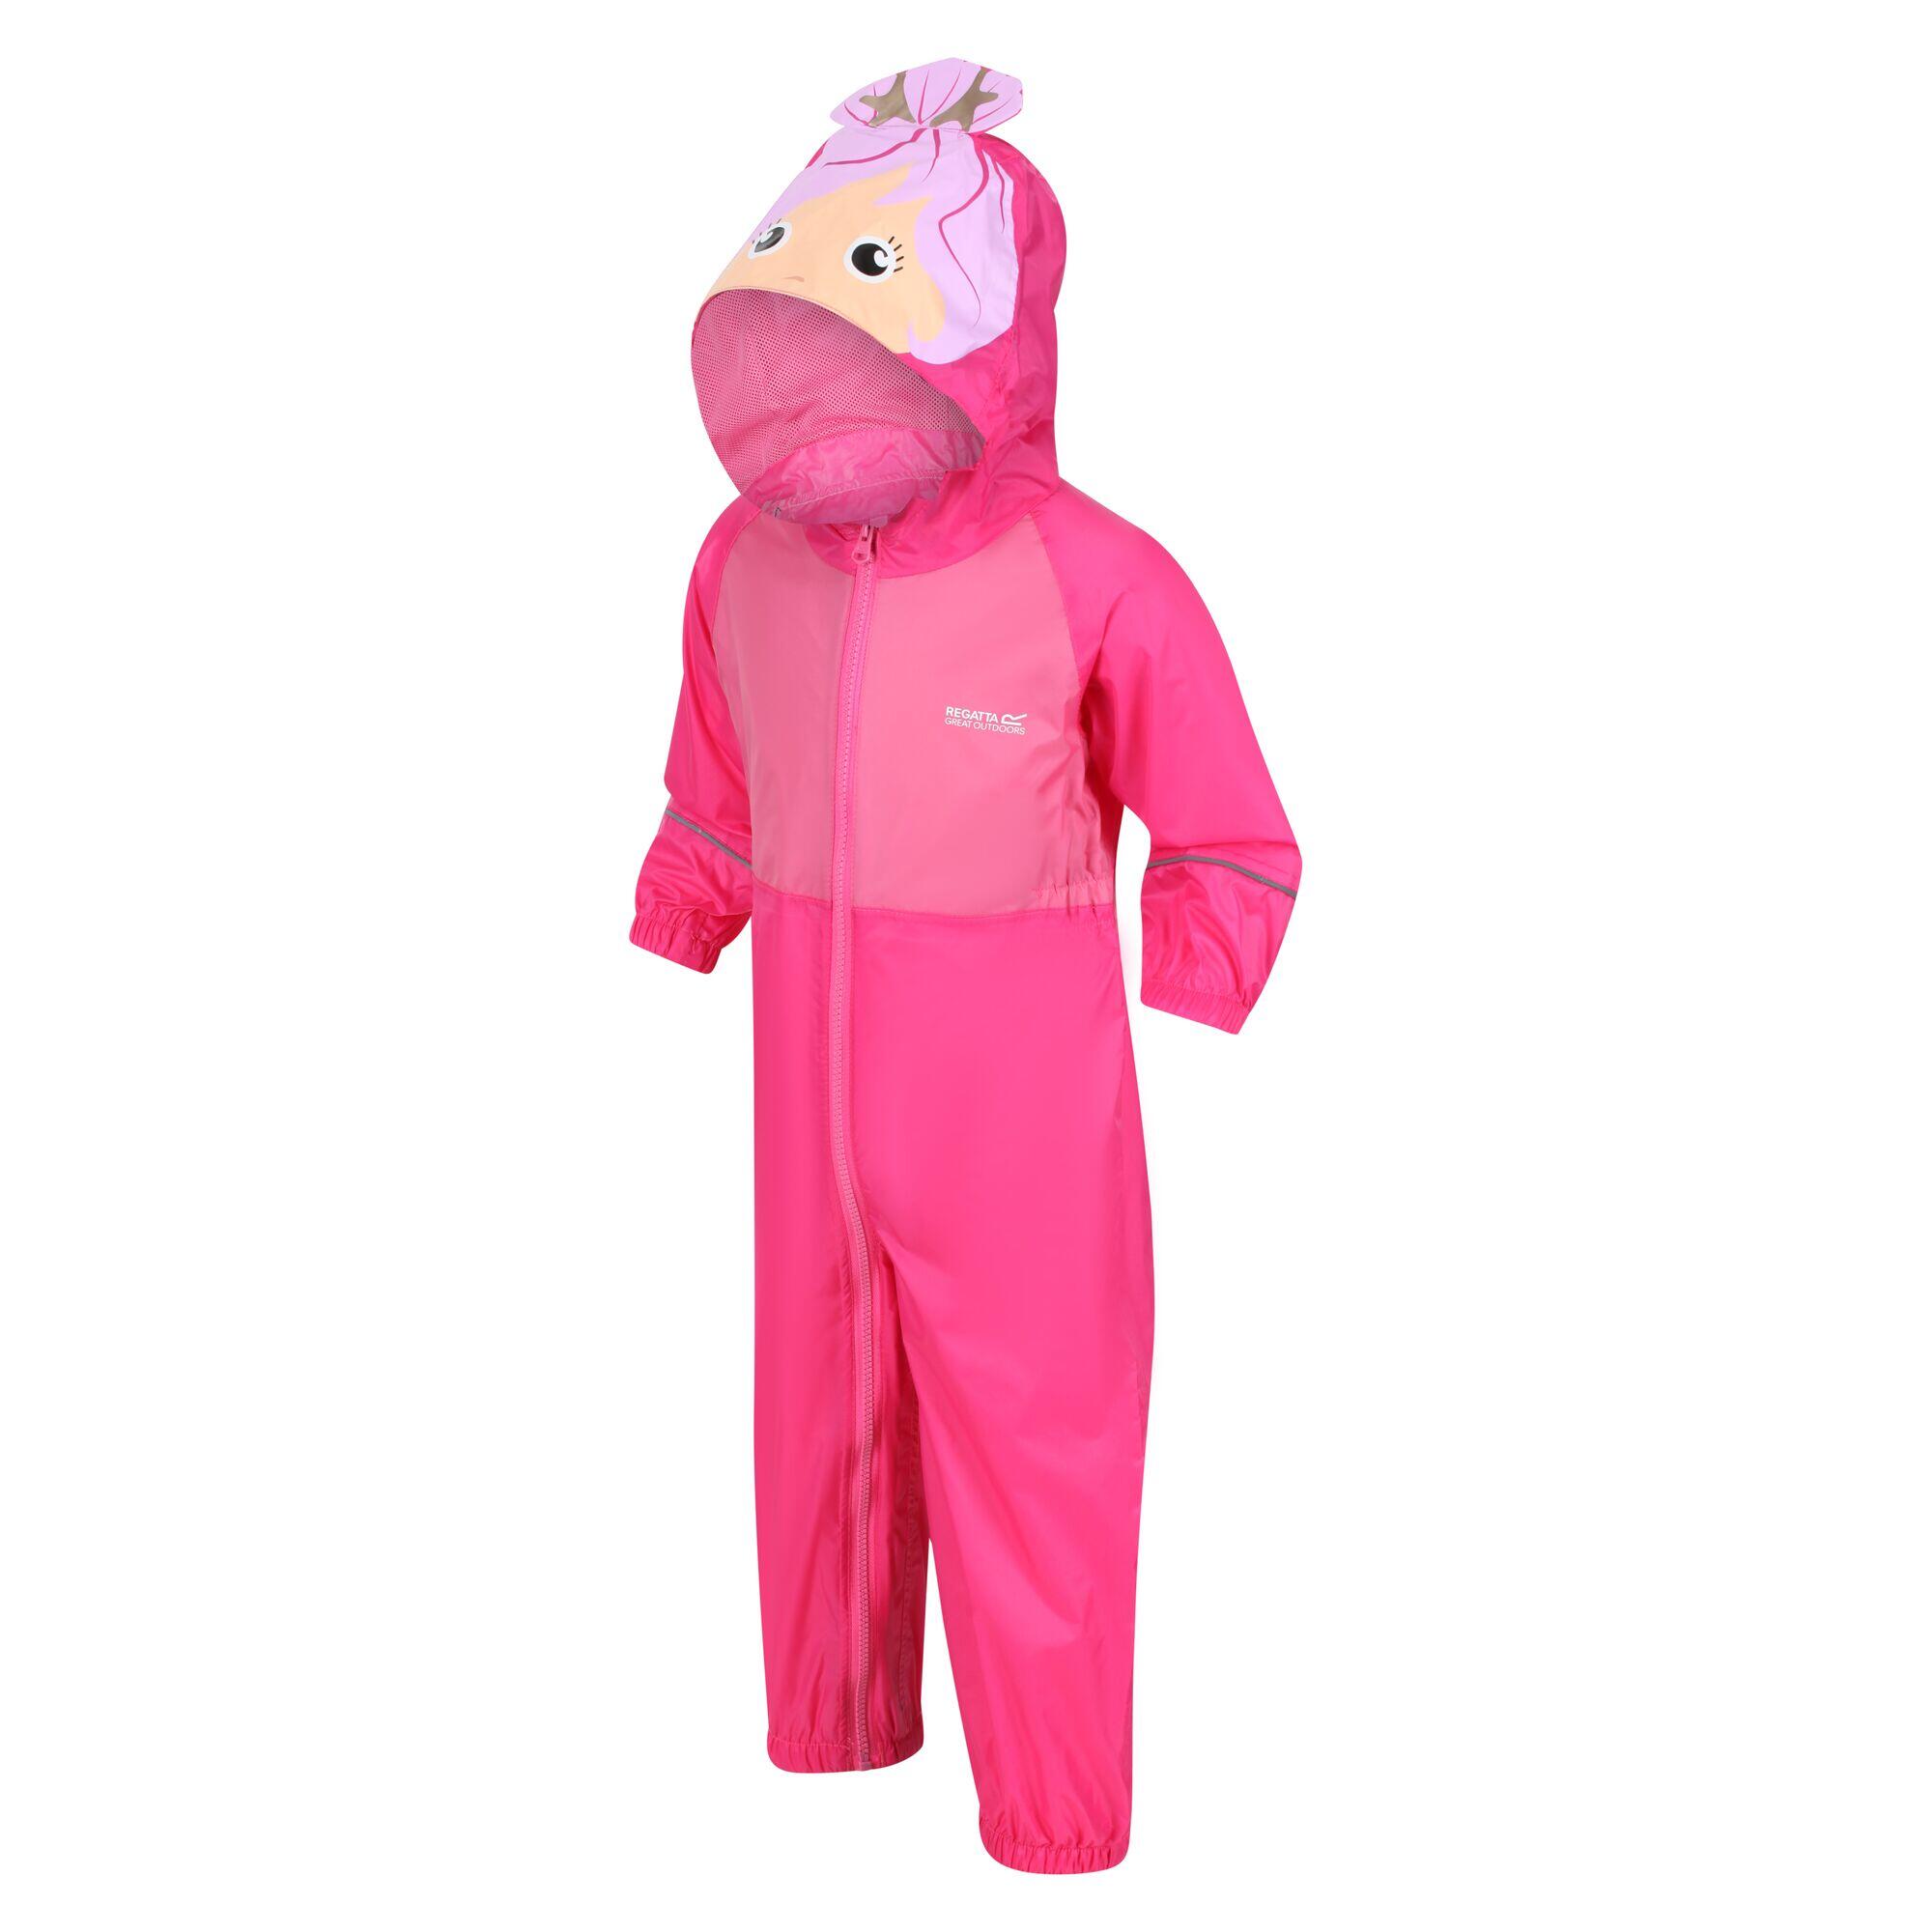 Charco Kids Hiking Hooded Puddle Suit - Pink Mermaid 1/4